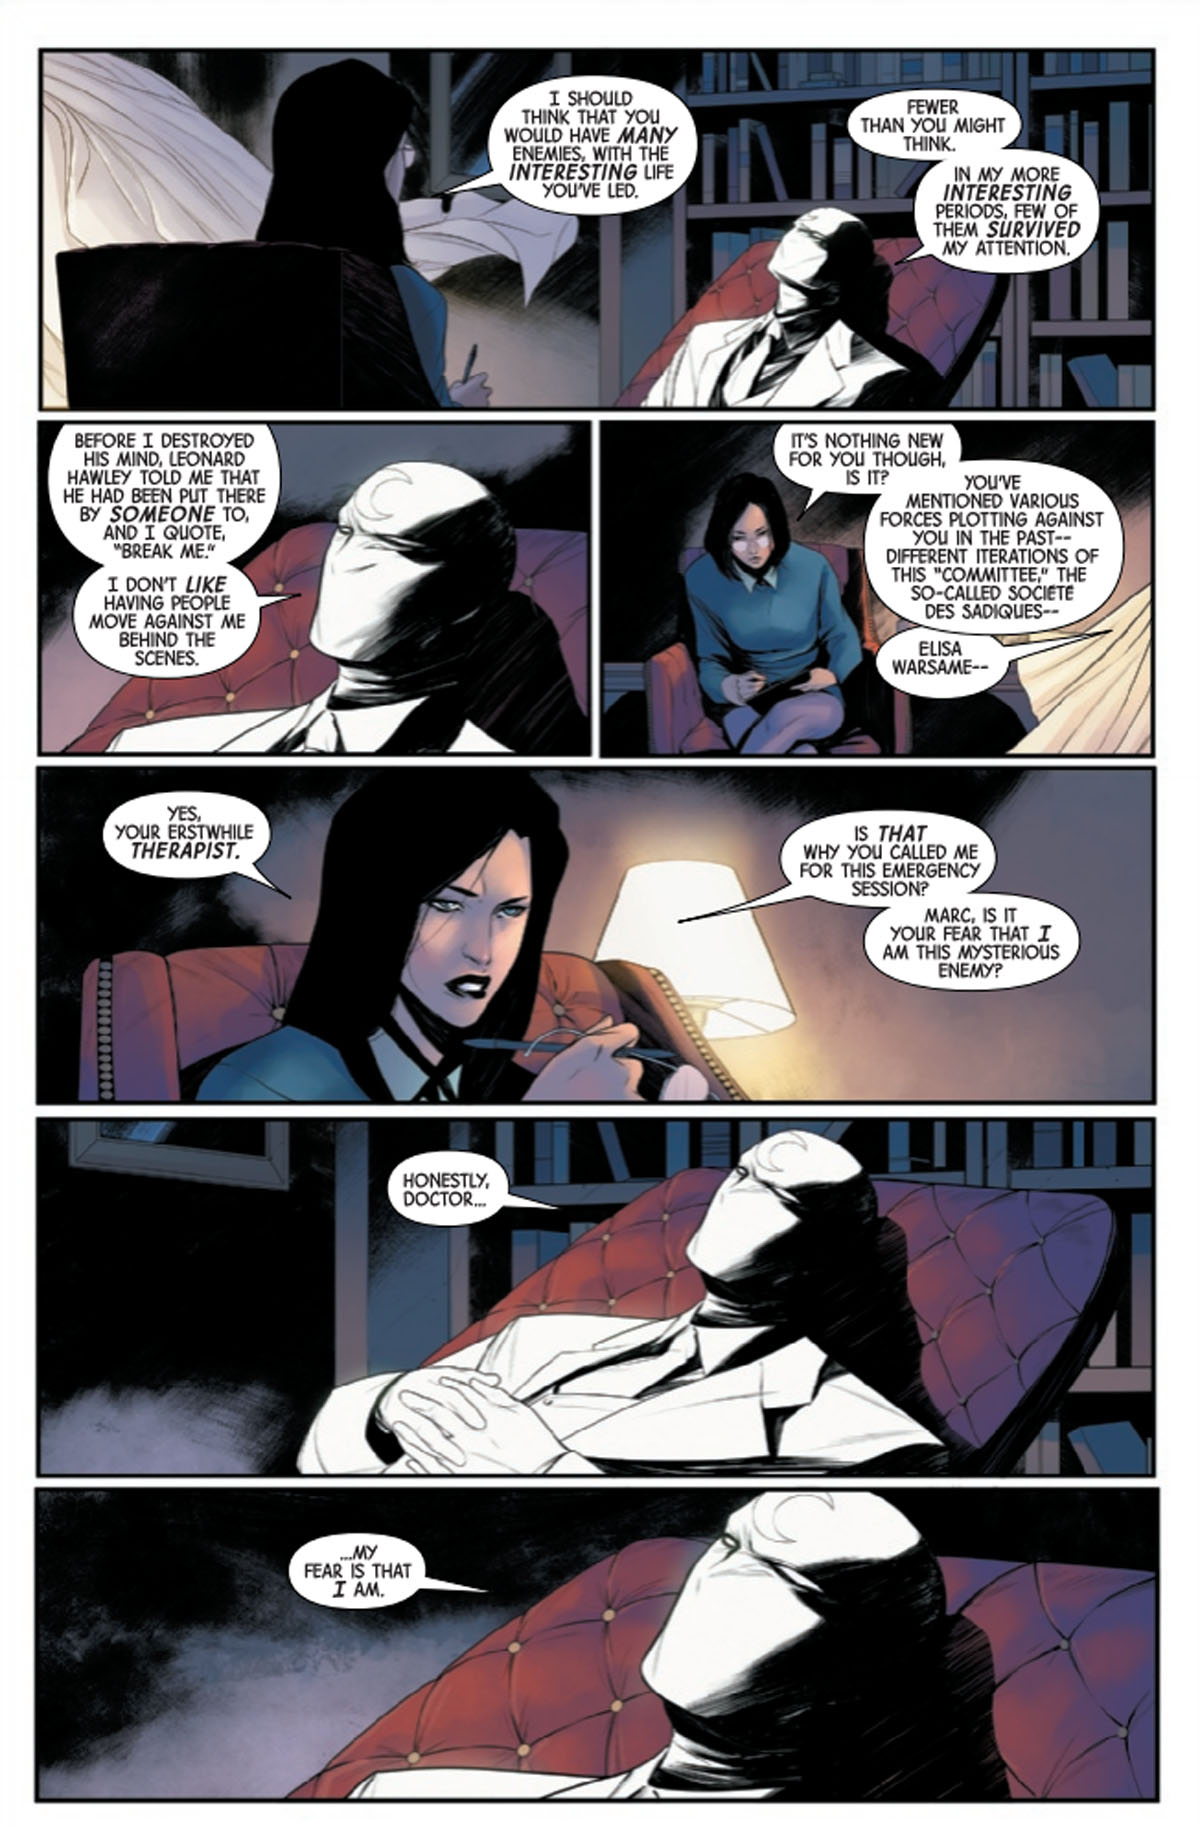 Moon Knight #3 page 2